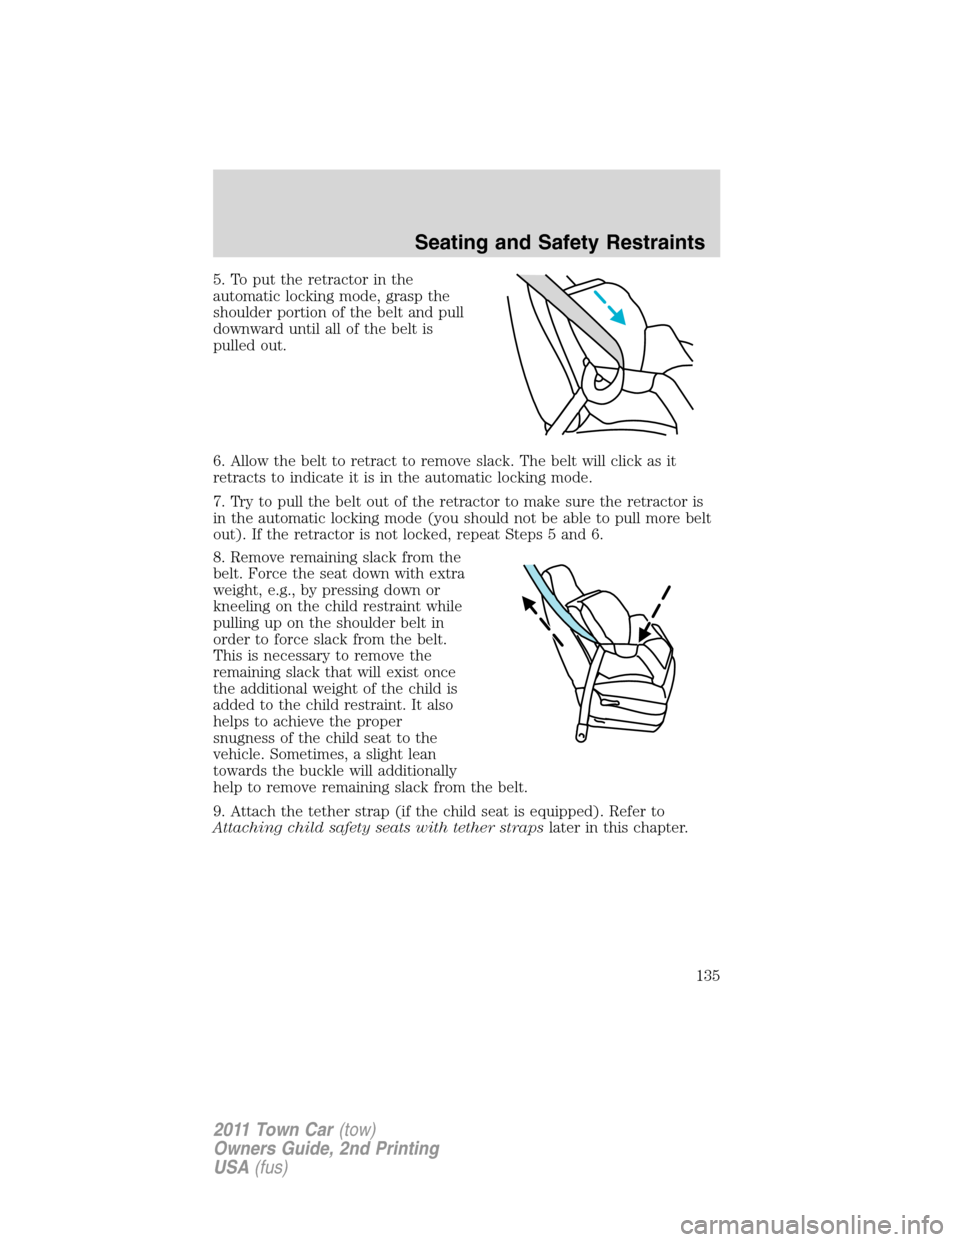 LINCOLN TOWN CAR 2011  Owners Manual 5. To put the retractor in the
automatic locking mode, grasp the
shoulder portion of the belt and pull
downward until all of the belt is
pulled out.
6. Allow the belt to retract to remove slack. The b